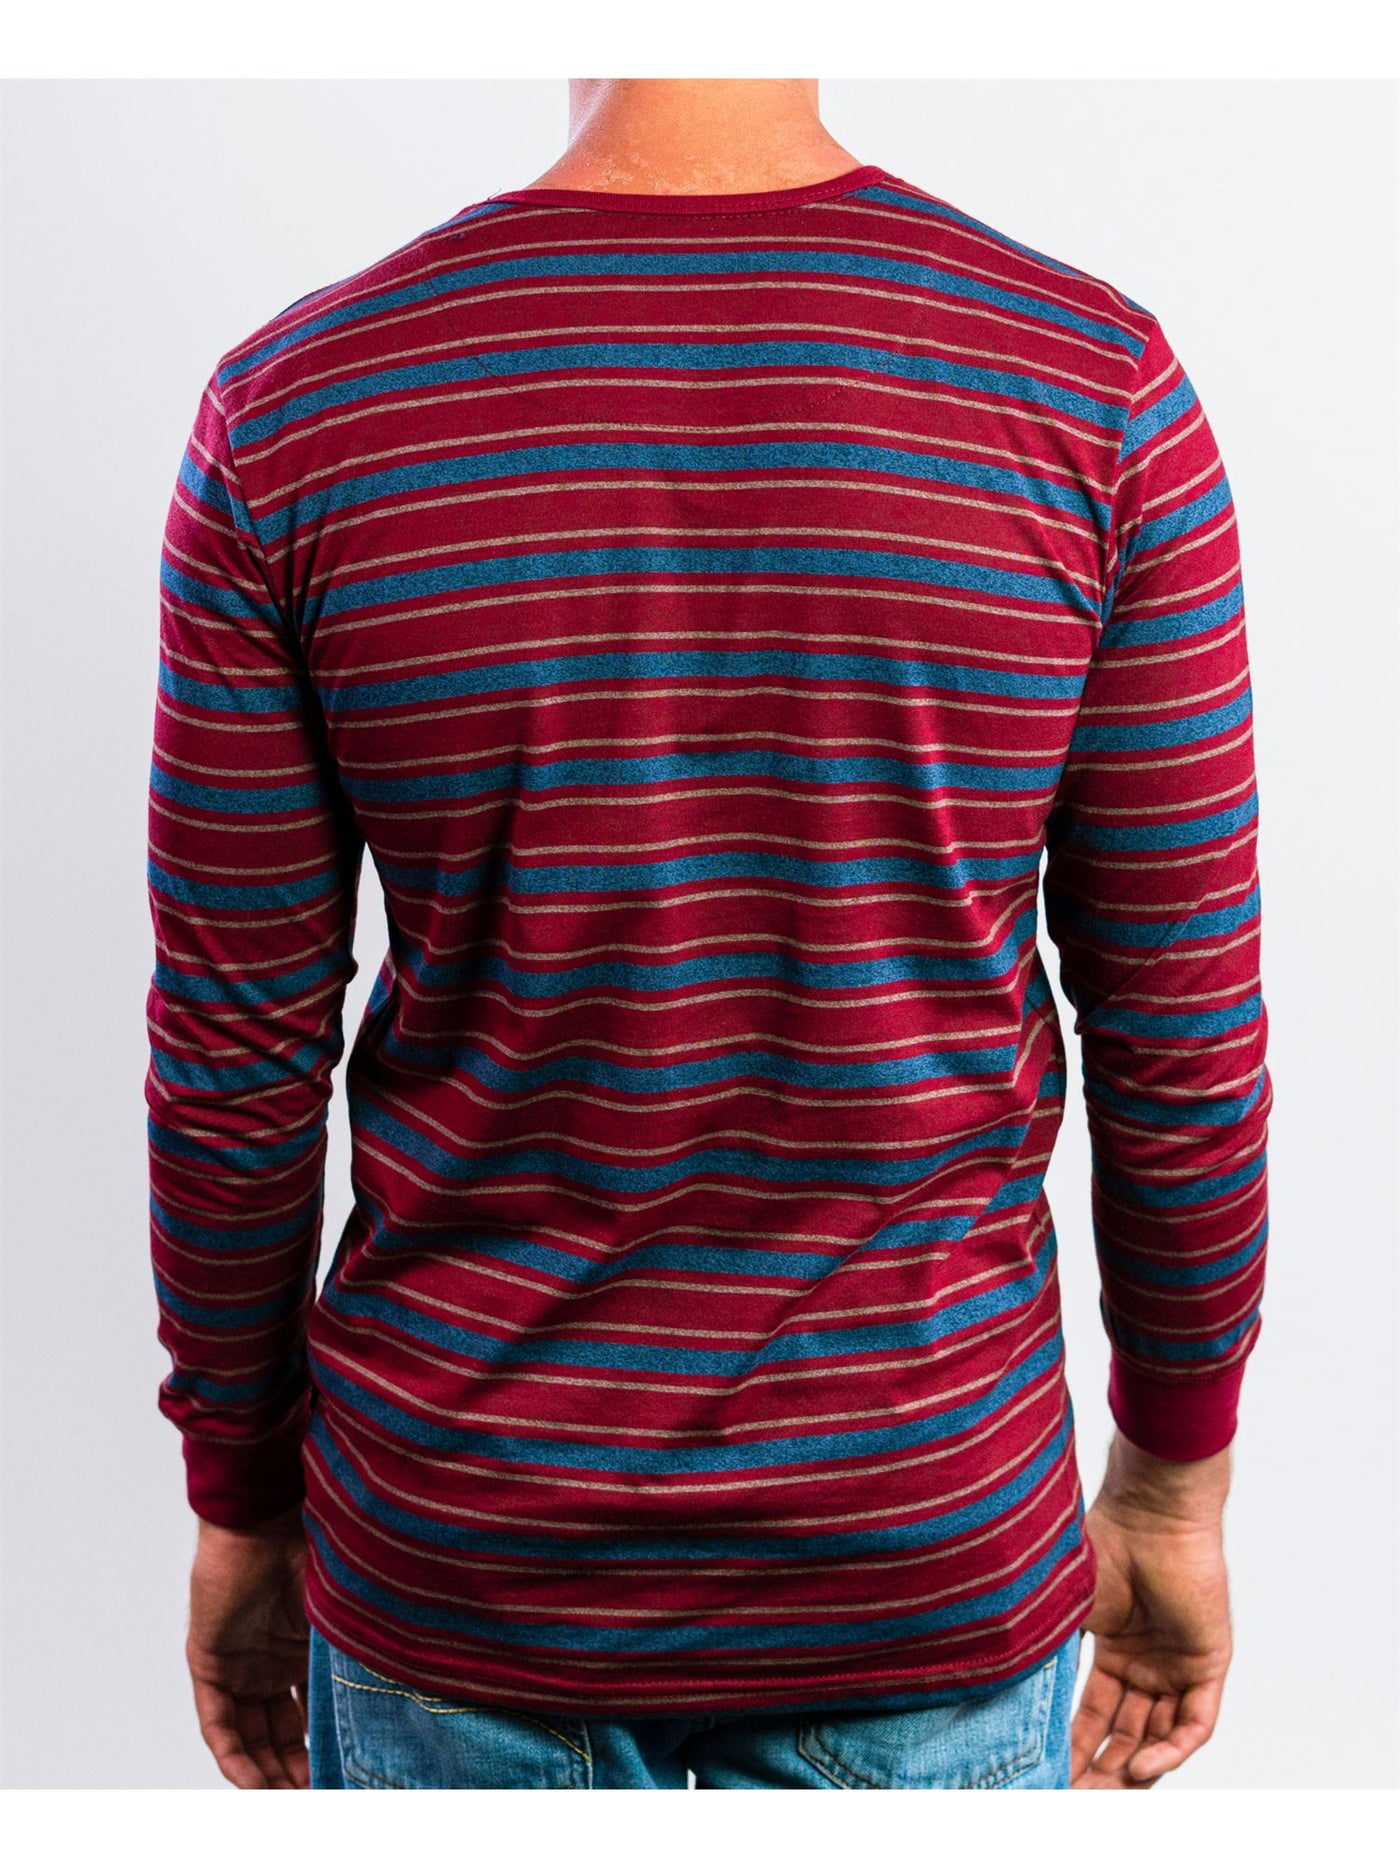 BEAUTIFUL GIANT Mens Red Striped Casual Shirt S